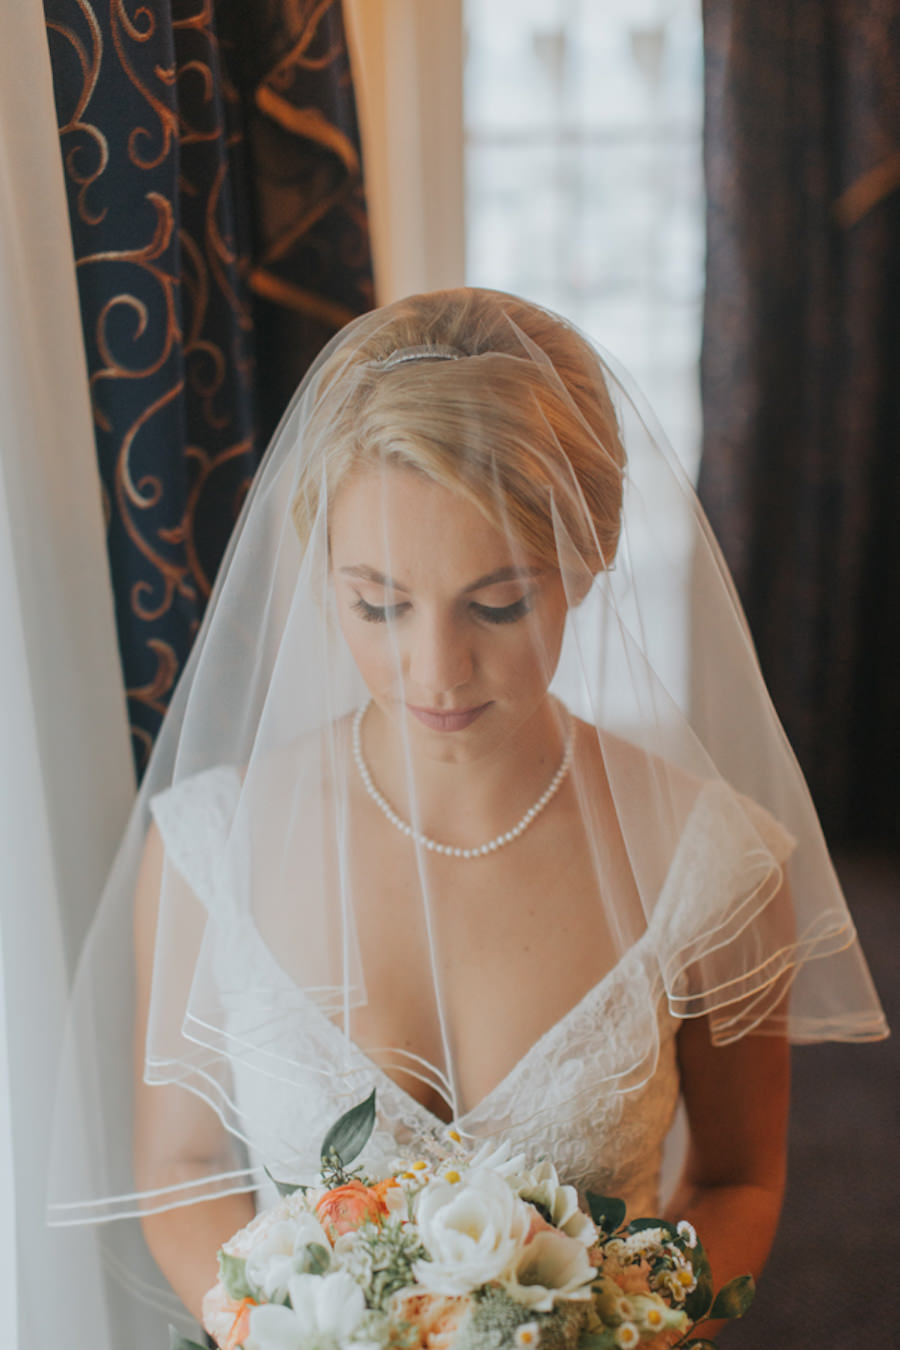 Bride Wedding Portrait in Ivory, Lace, Allure Wedding Dress and Blusher Veil